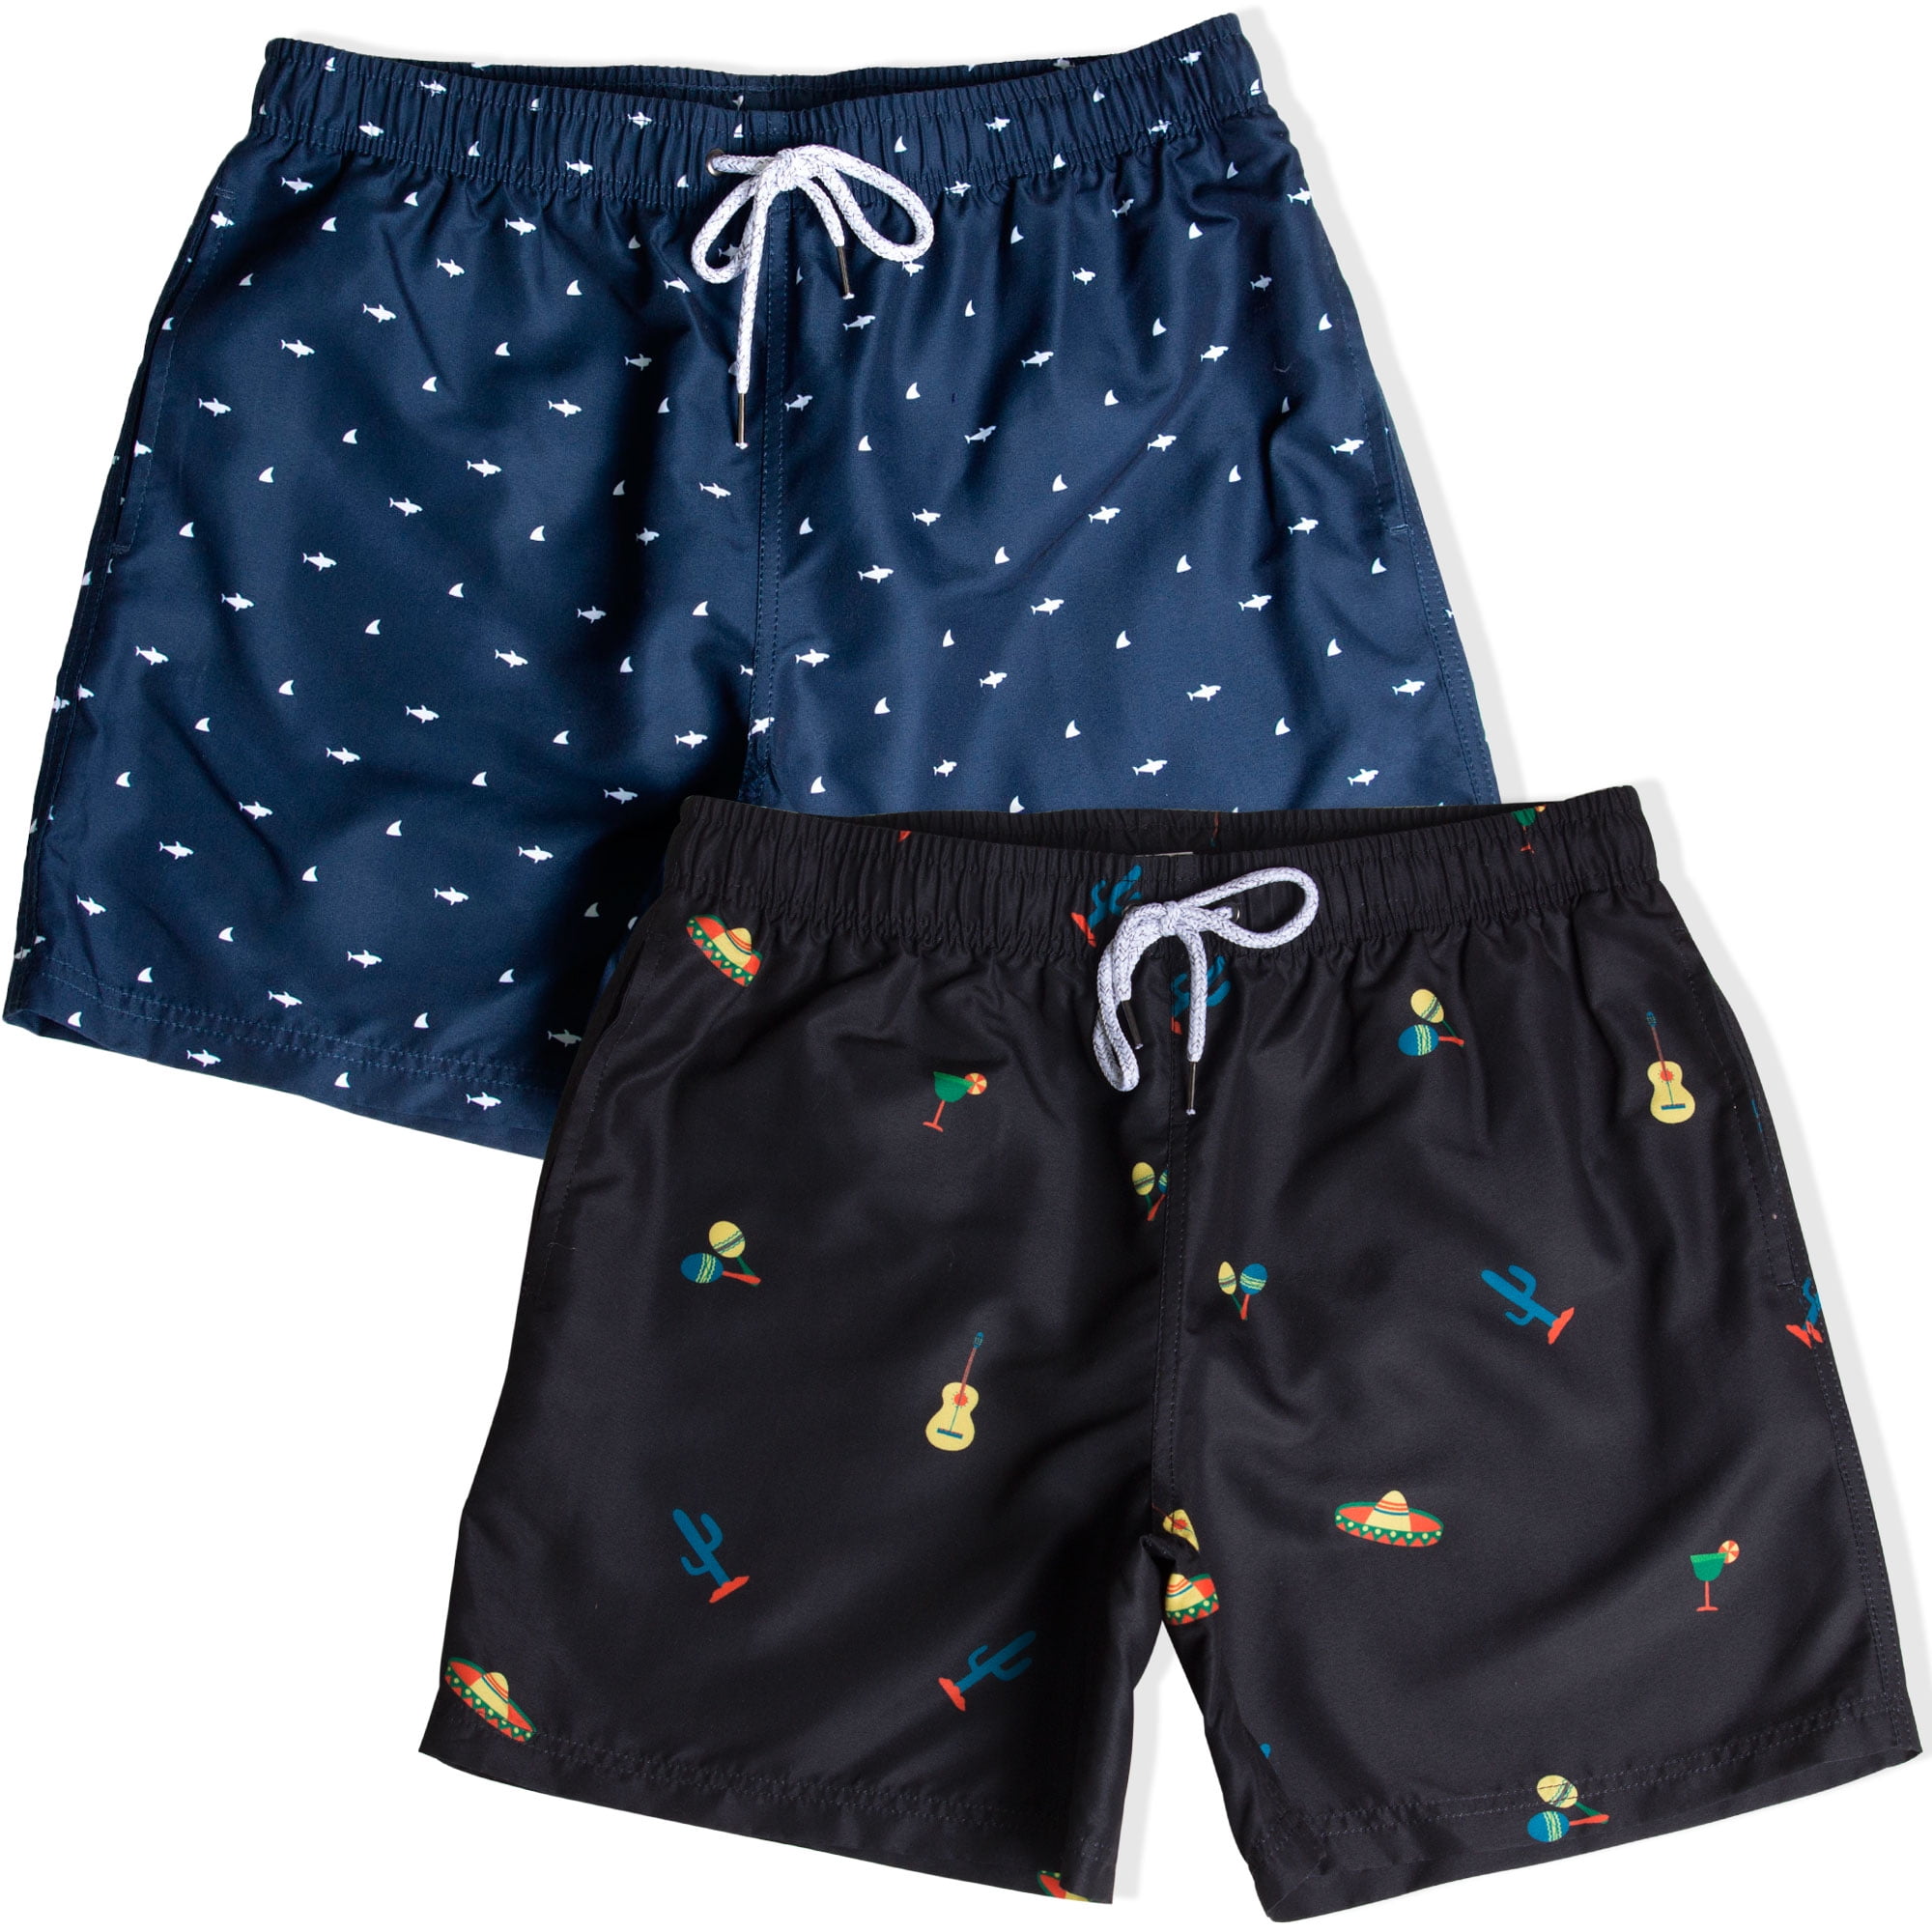 Mens Athletic Swim Trunks Polyester I Just Freaking Love Goats OK Swimsuit with Pockets